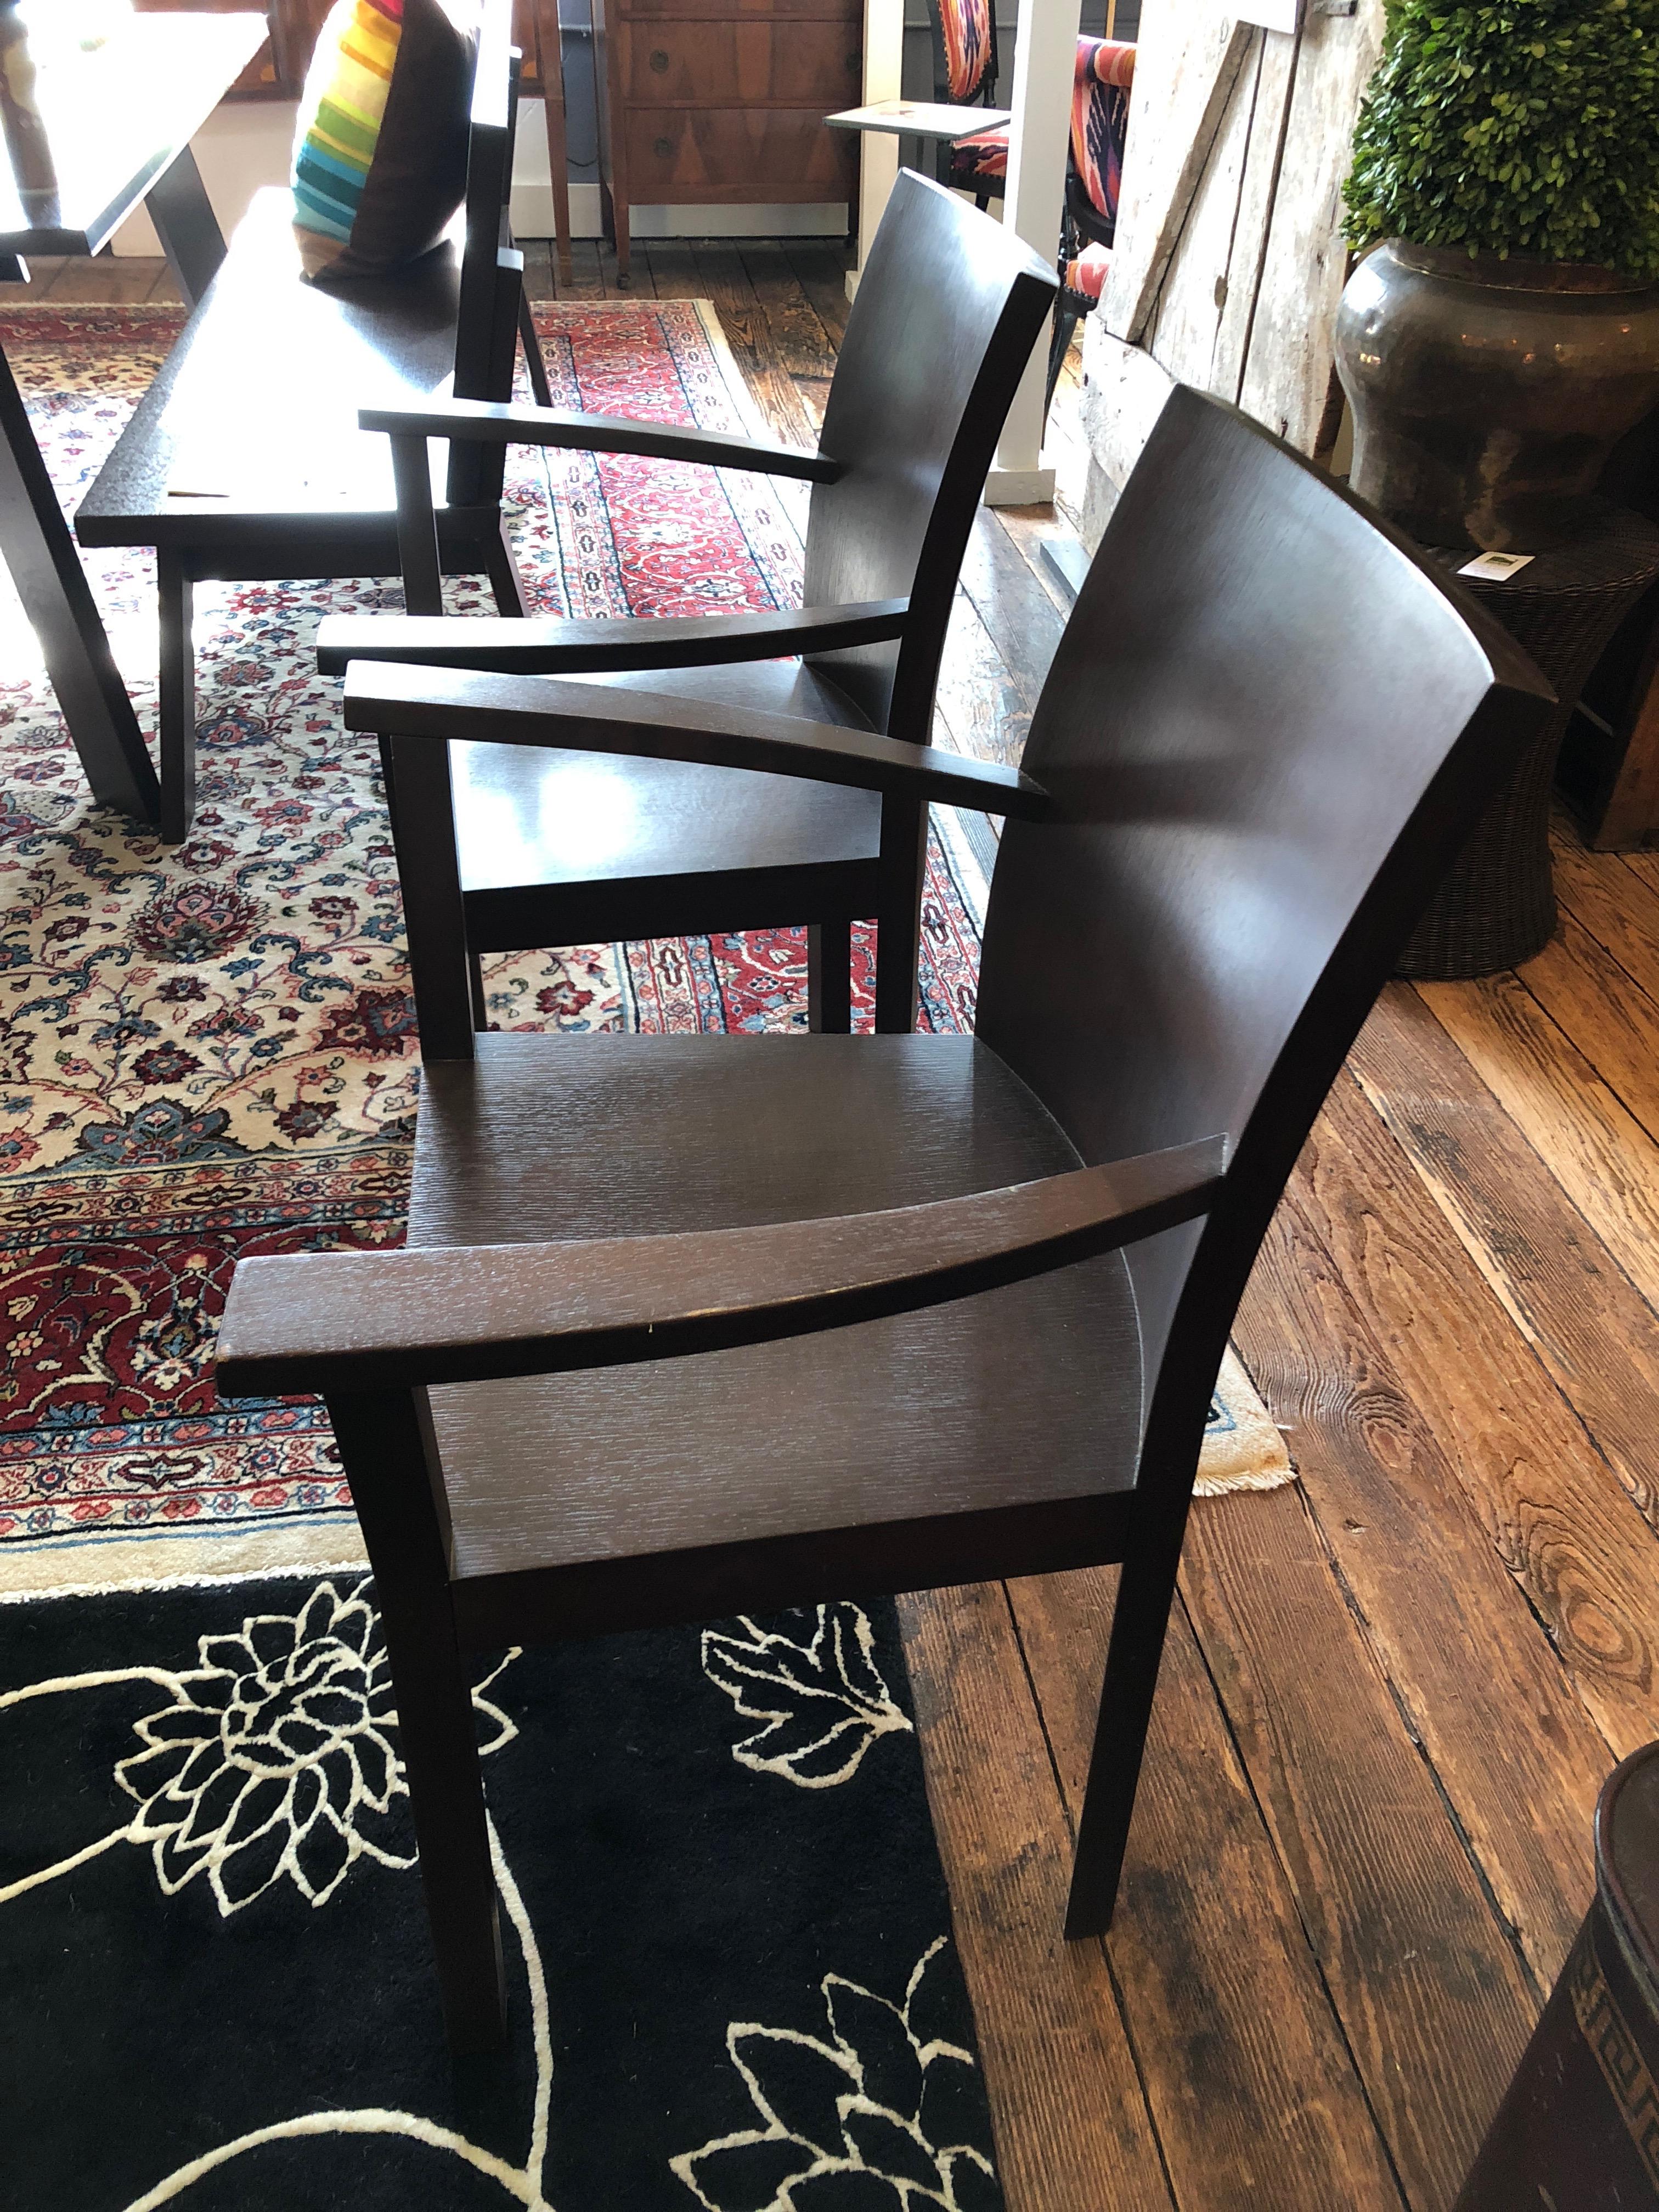 Sophisticated armchairs by the German maker Bulthaup, having clean lines and handsome walnut construction.
There's a matching table and benches for sale as well.